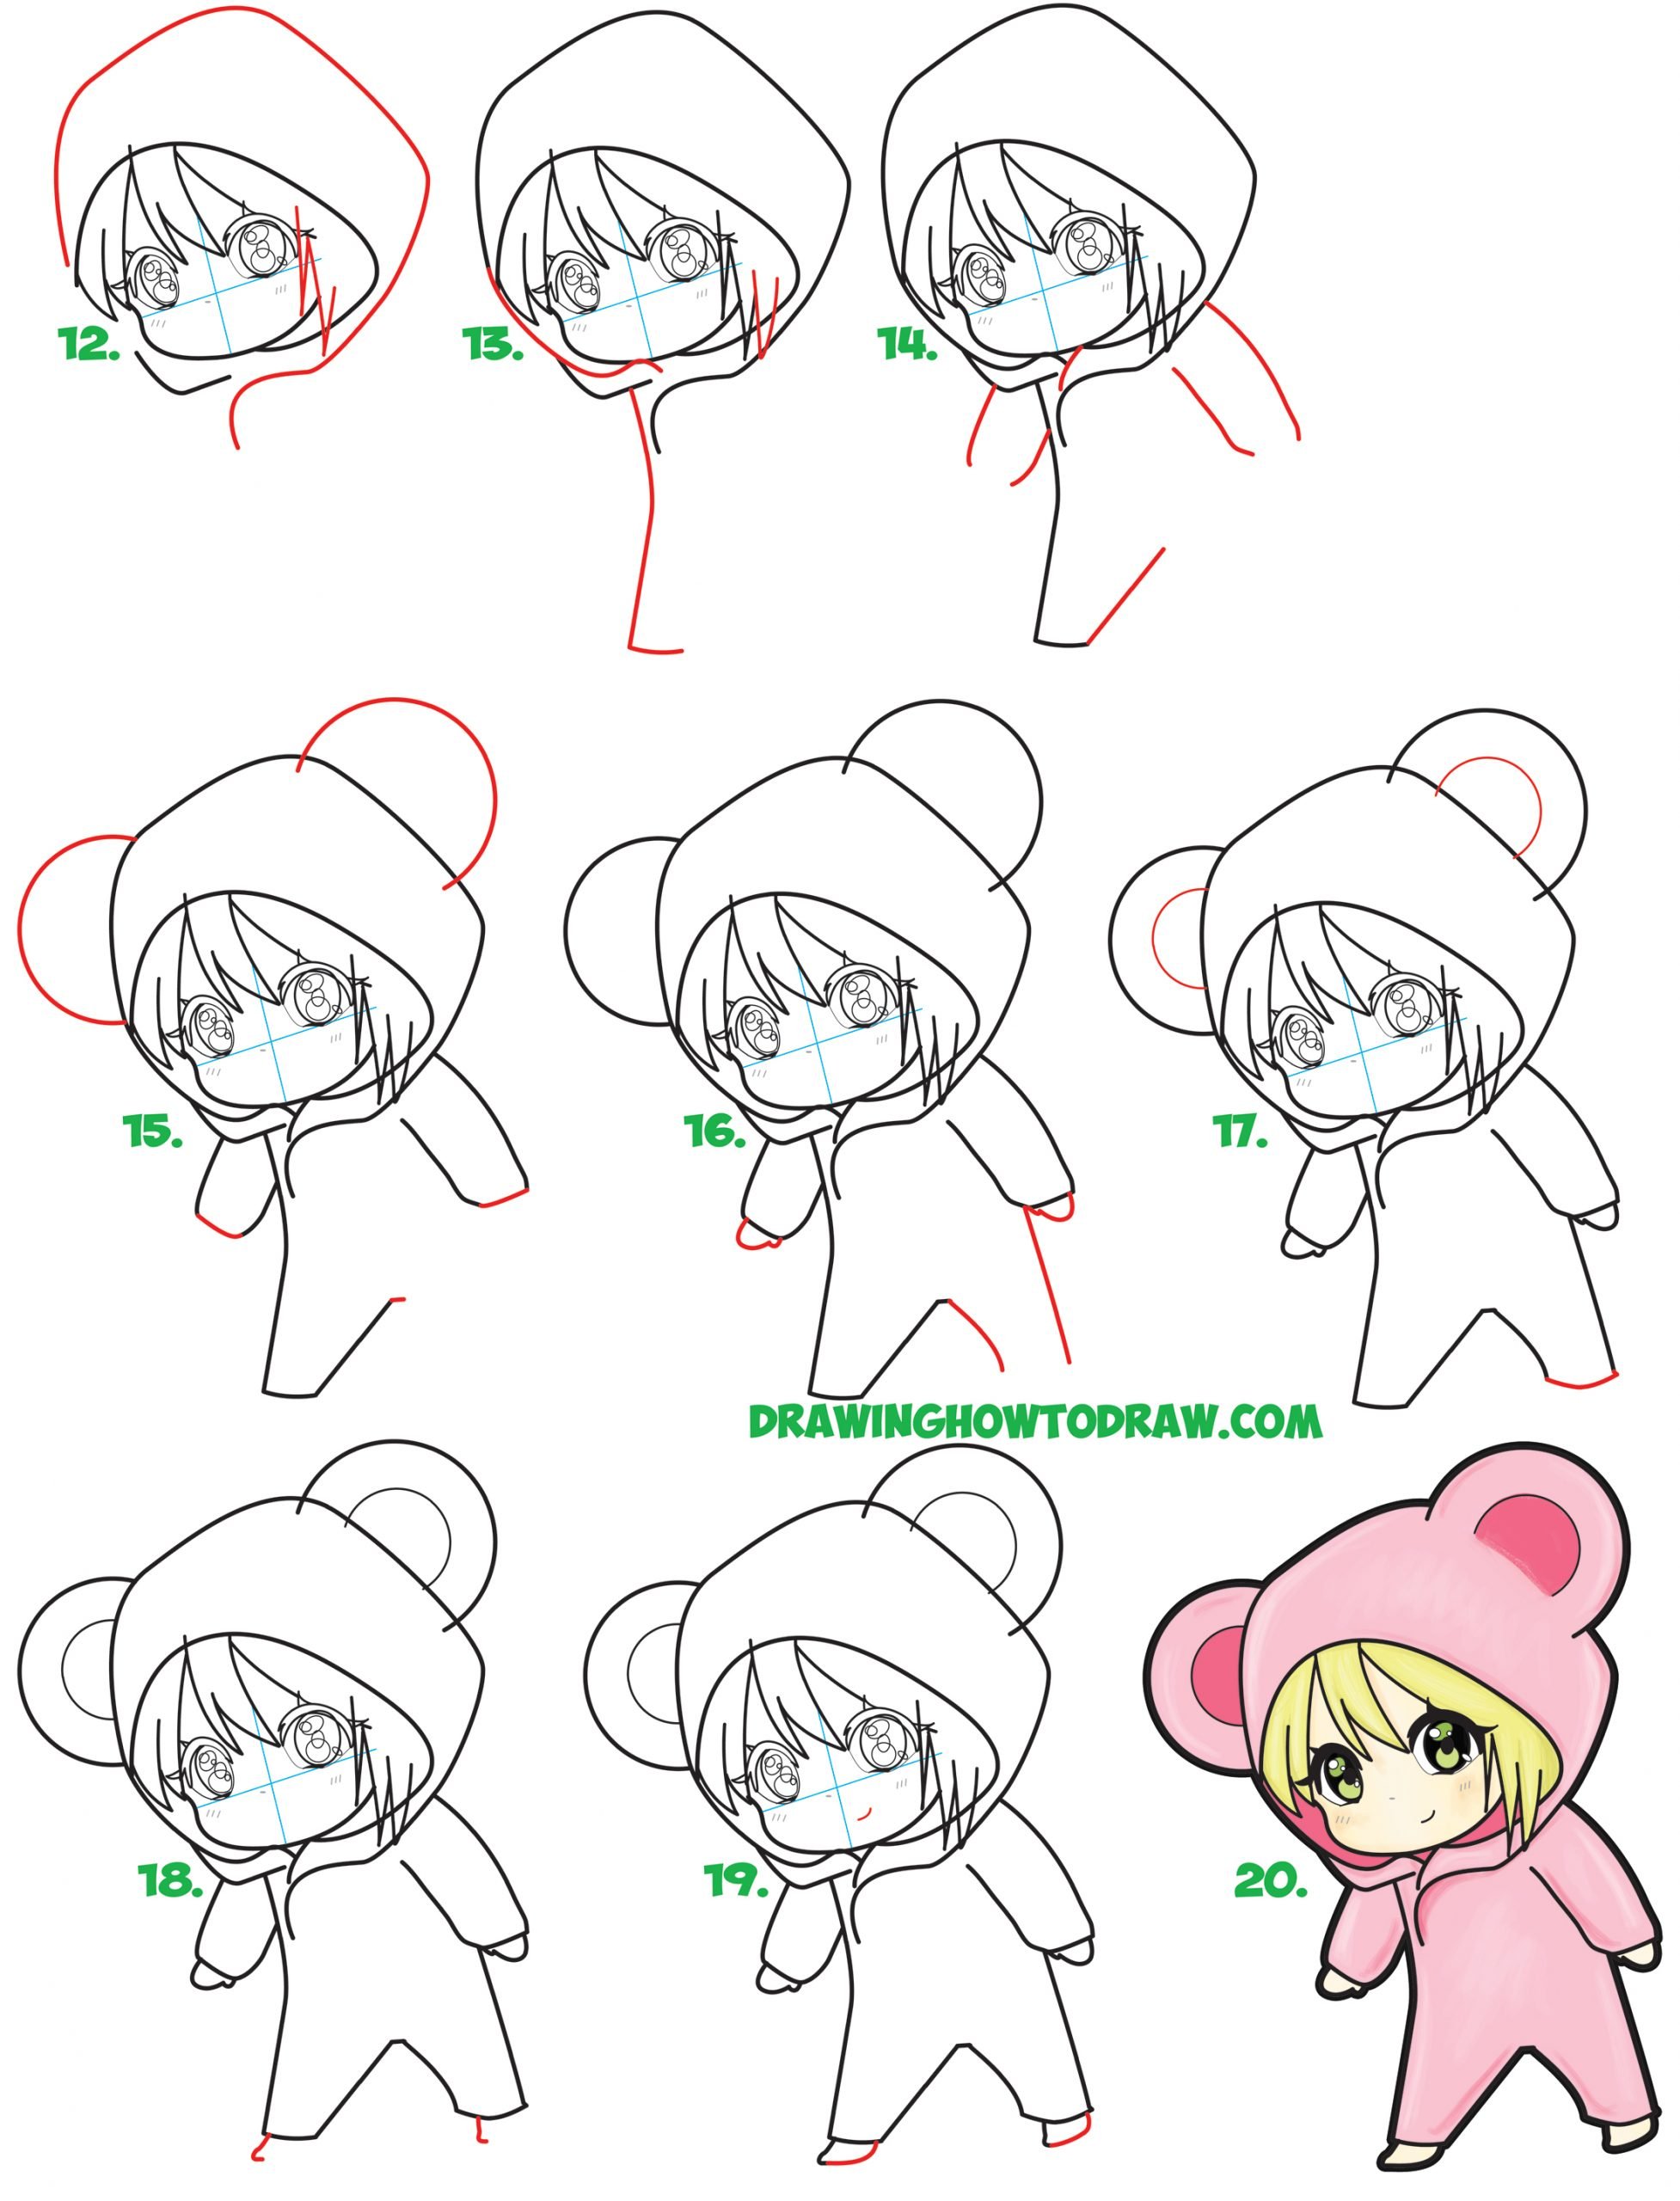 Learn How to Draw a Cute Chibi Girl Dressed in a Hooded ...